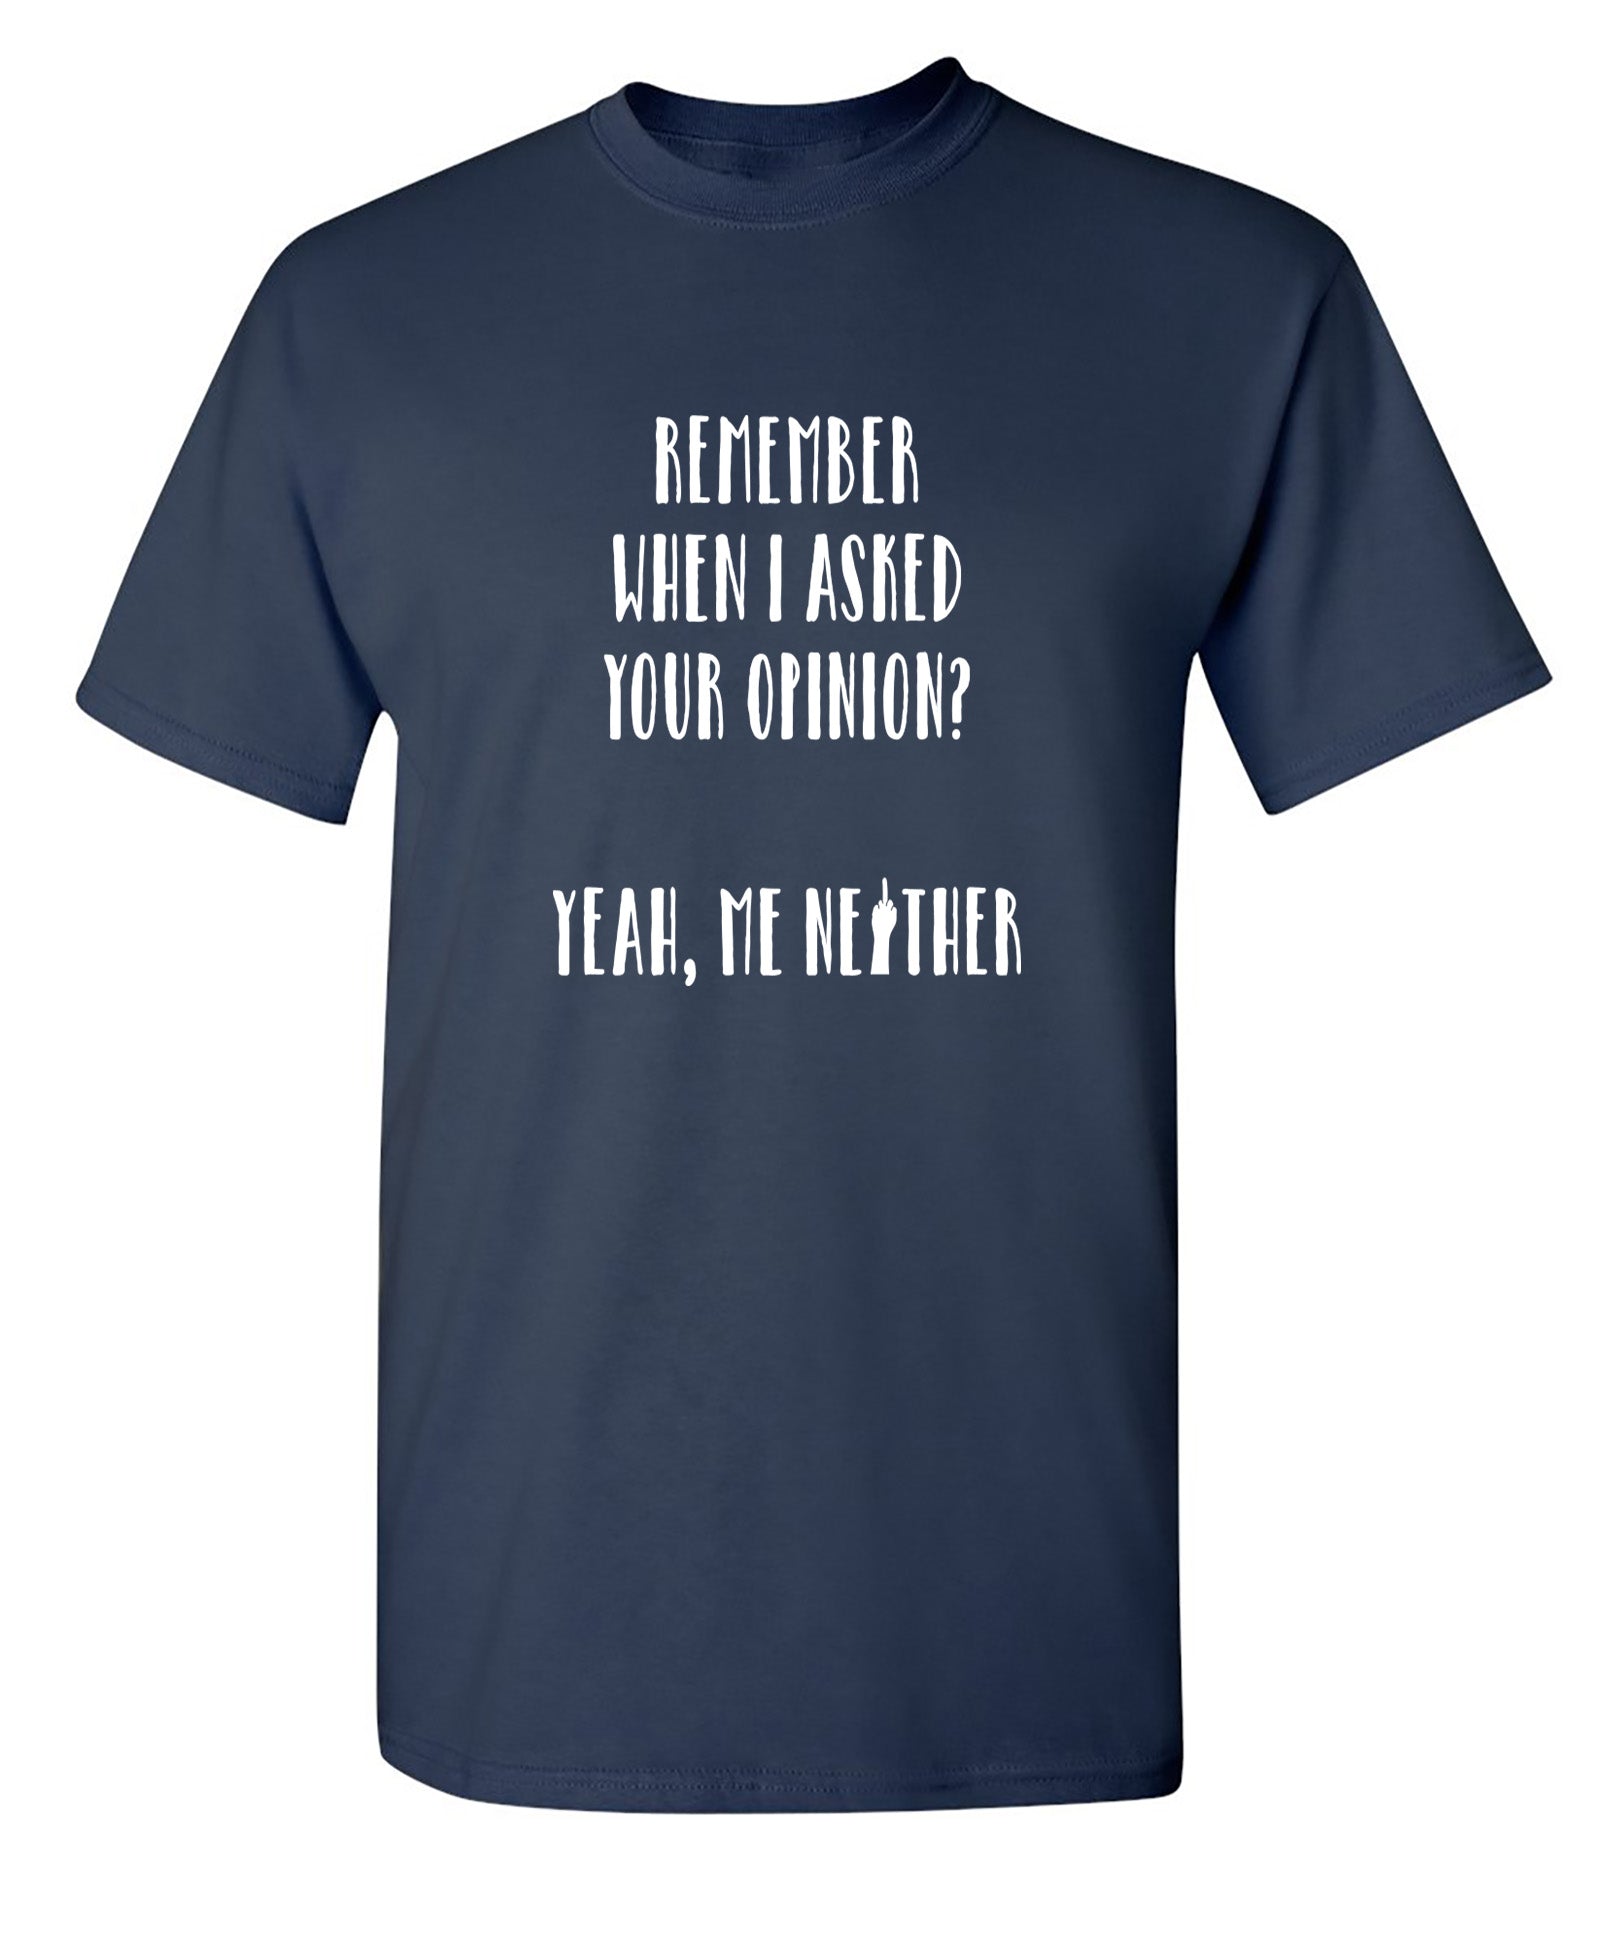 Remember When I Asked For Your Opinion - Funny T Shirts & Graphic Tees